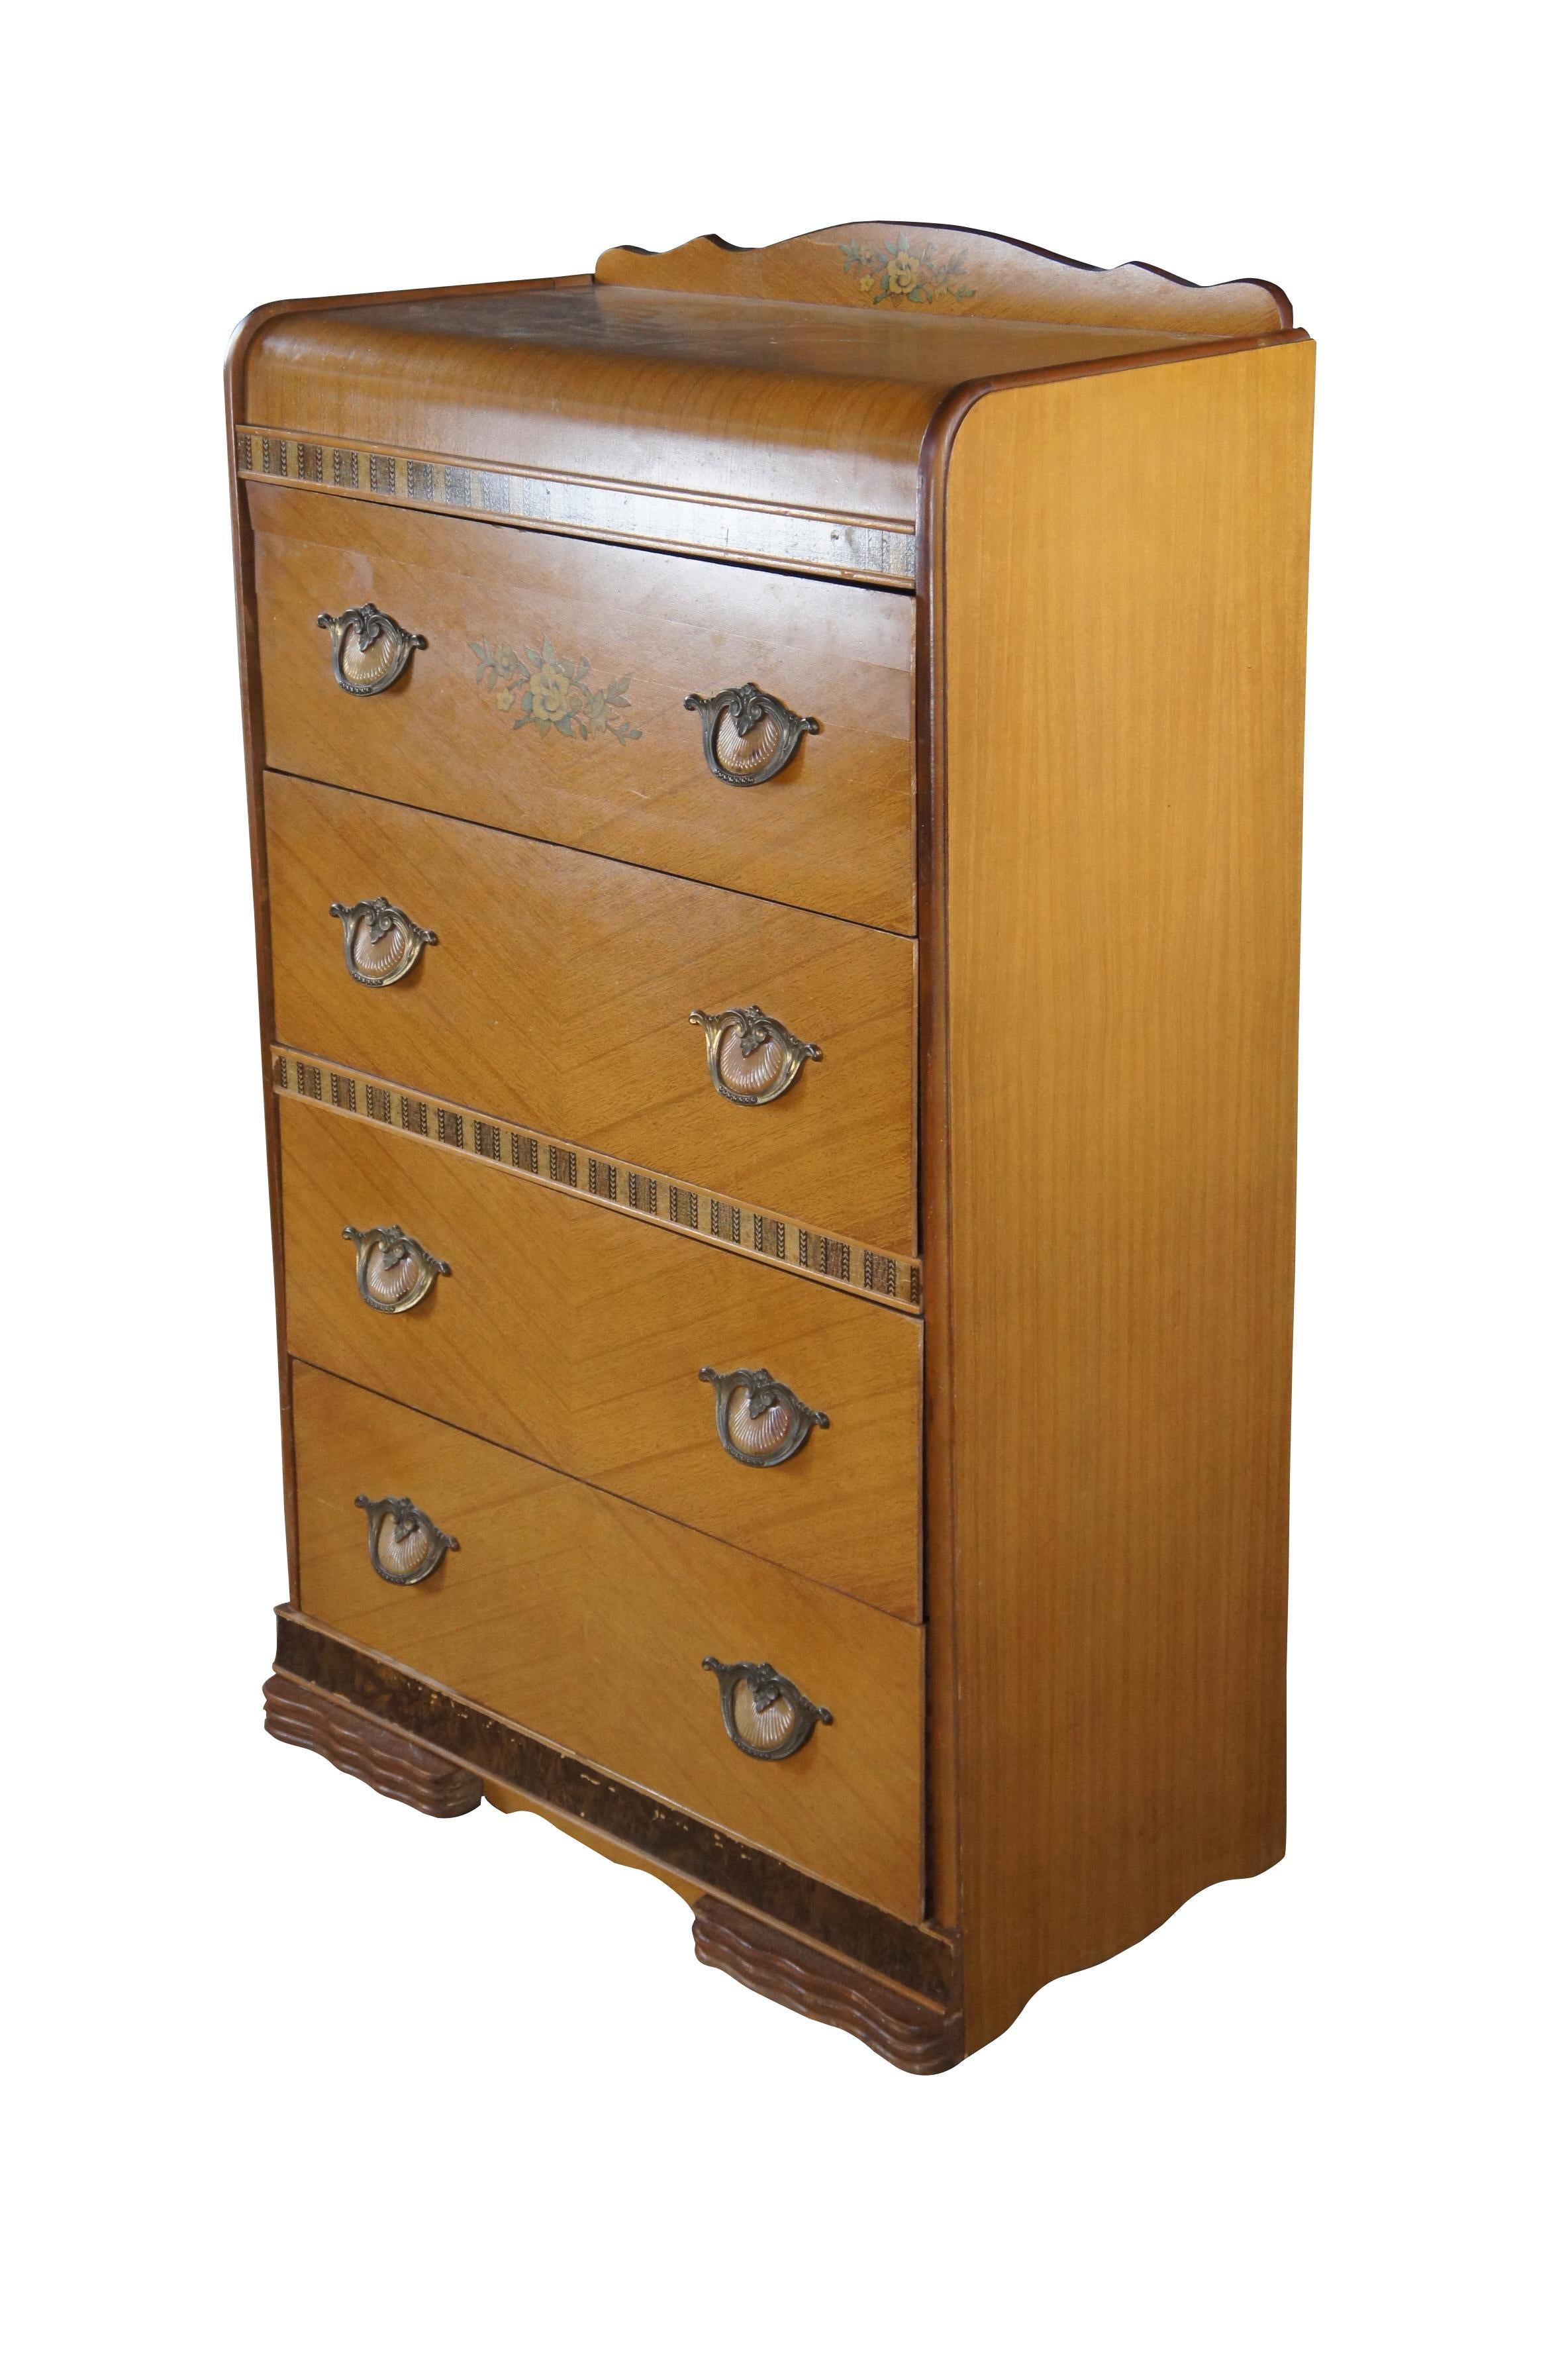 Mid 20th Century Art Deco waterfall chest of drawers.  Made from mahogany with a matchbook 